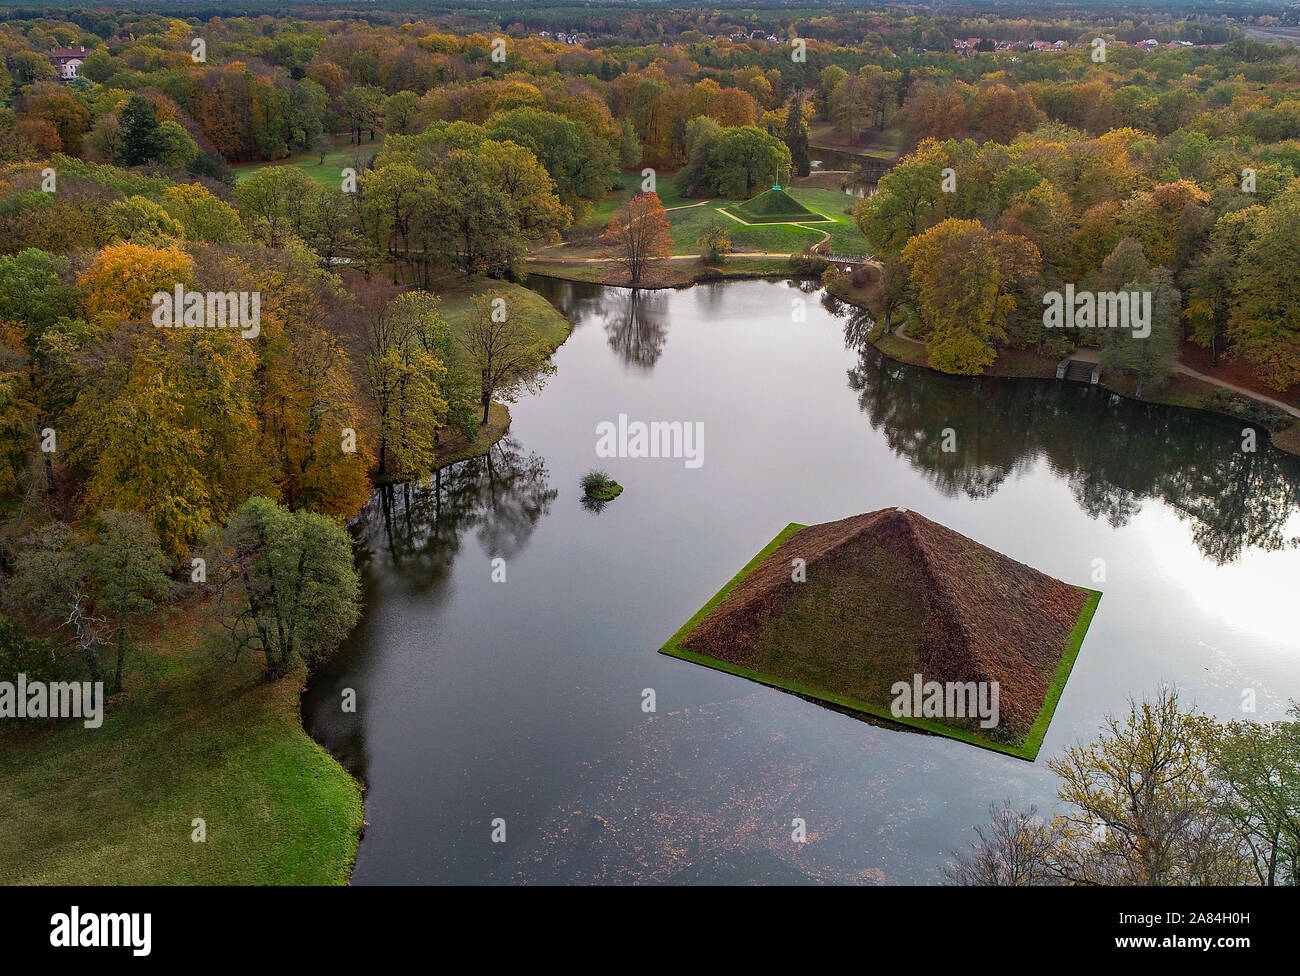 06 November 2019, Brandenburg, Cottbus: The sea pyramid and behind it the land pyramid in the Fürst-Pückler-Park of Branitz (aerial view with a drone). At a press conference held on the same day at Branitz Palace, the Verein Schlösser und Gärten Deutschland e.V. and the Stiftung Fürst-Pückler-Museum Park und Schloss Branitz jointly presented themselves to the public and talked about the current damage to historic gardens caused by climate change and the resulting dangers for cultural heritage. In the Branitzer Park, the condition of the valuable tree population deteriorated drastically in 2018 Stock Photo